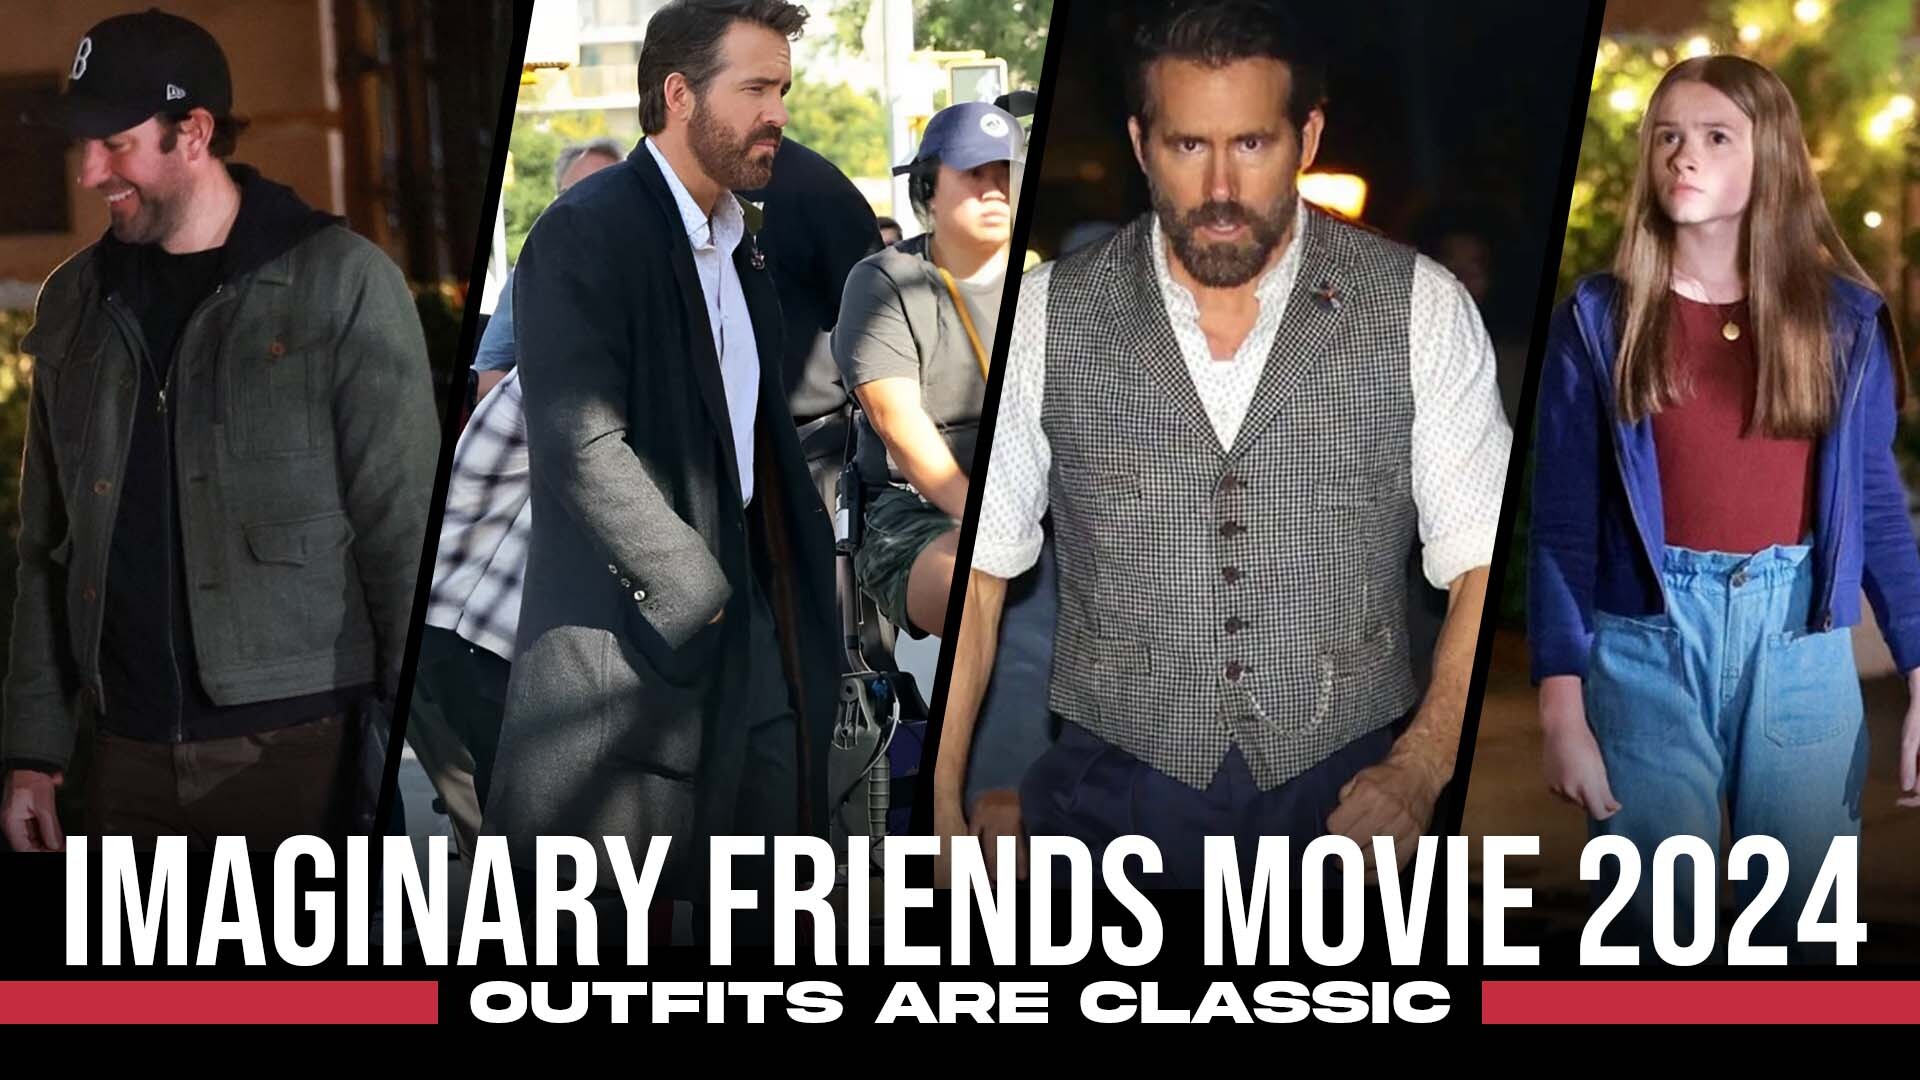 Imaginary Friends Movie 2024 Outfits Are Classic.